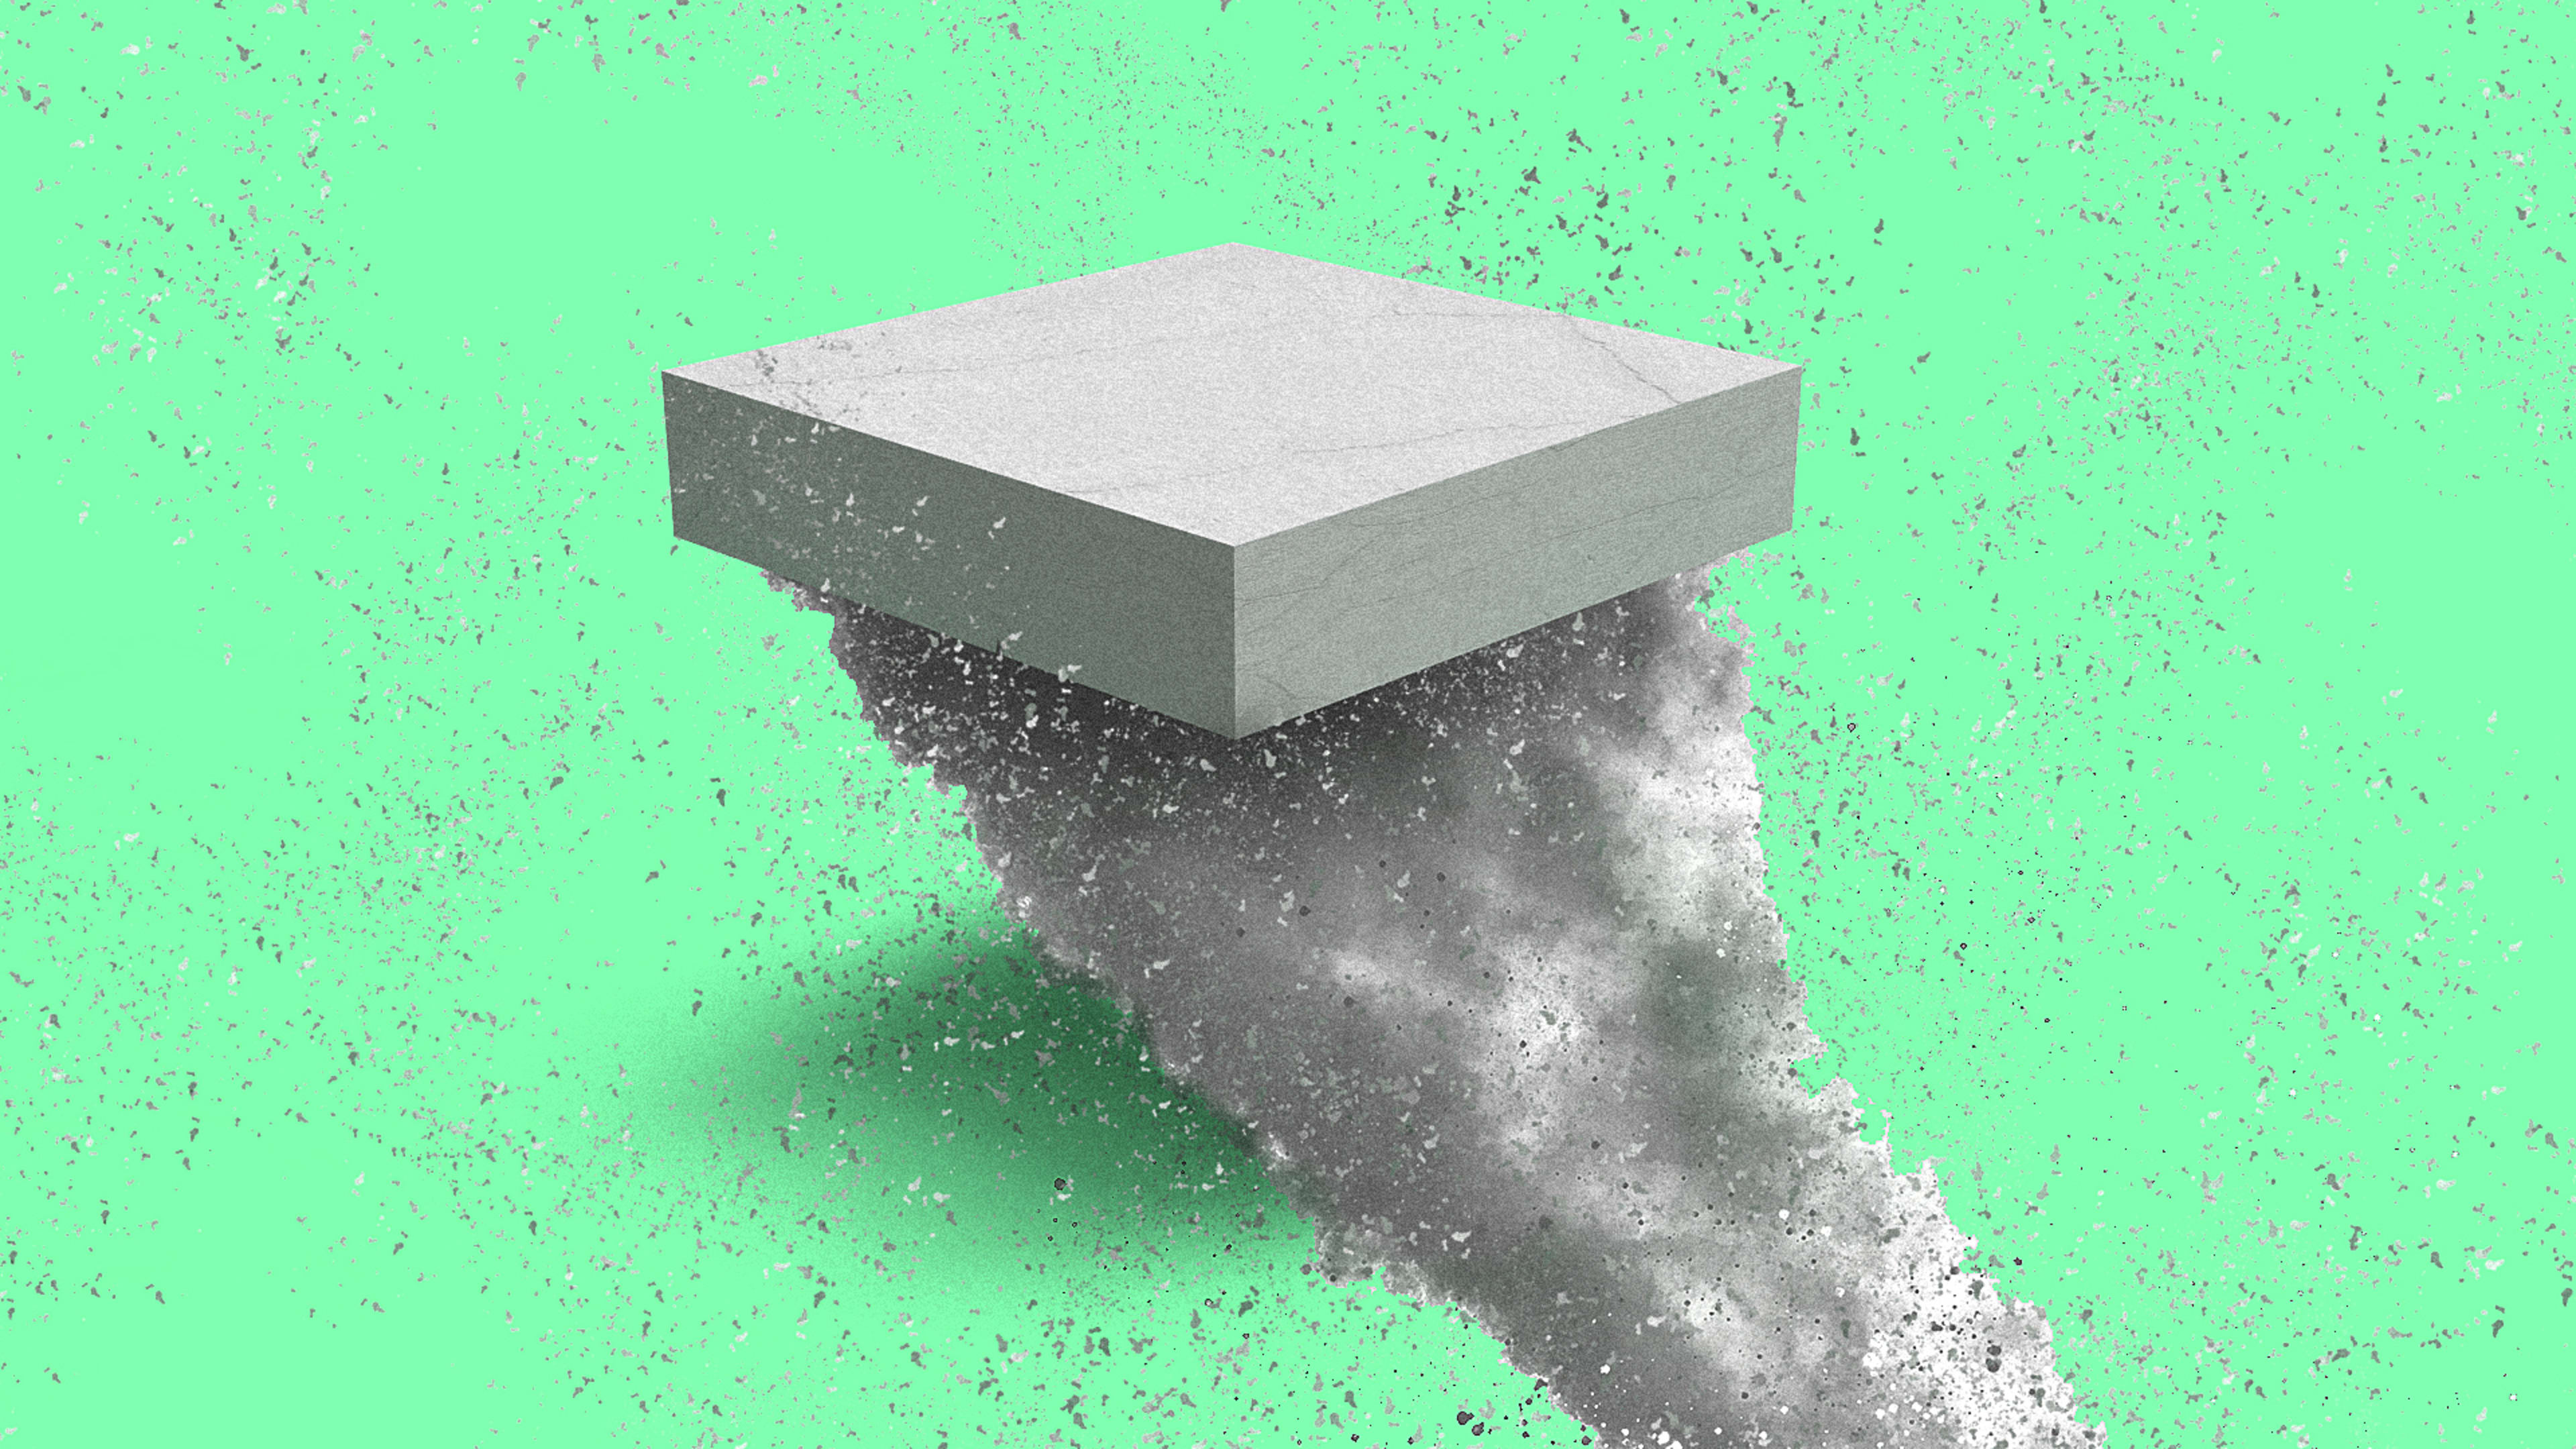 Most concrete produces pollution. This concrete is made of it